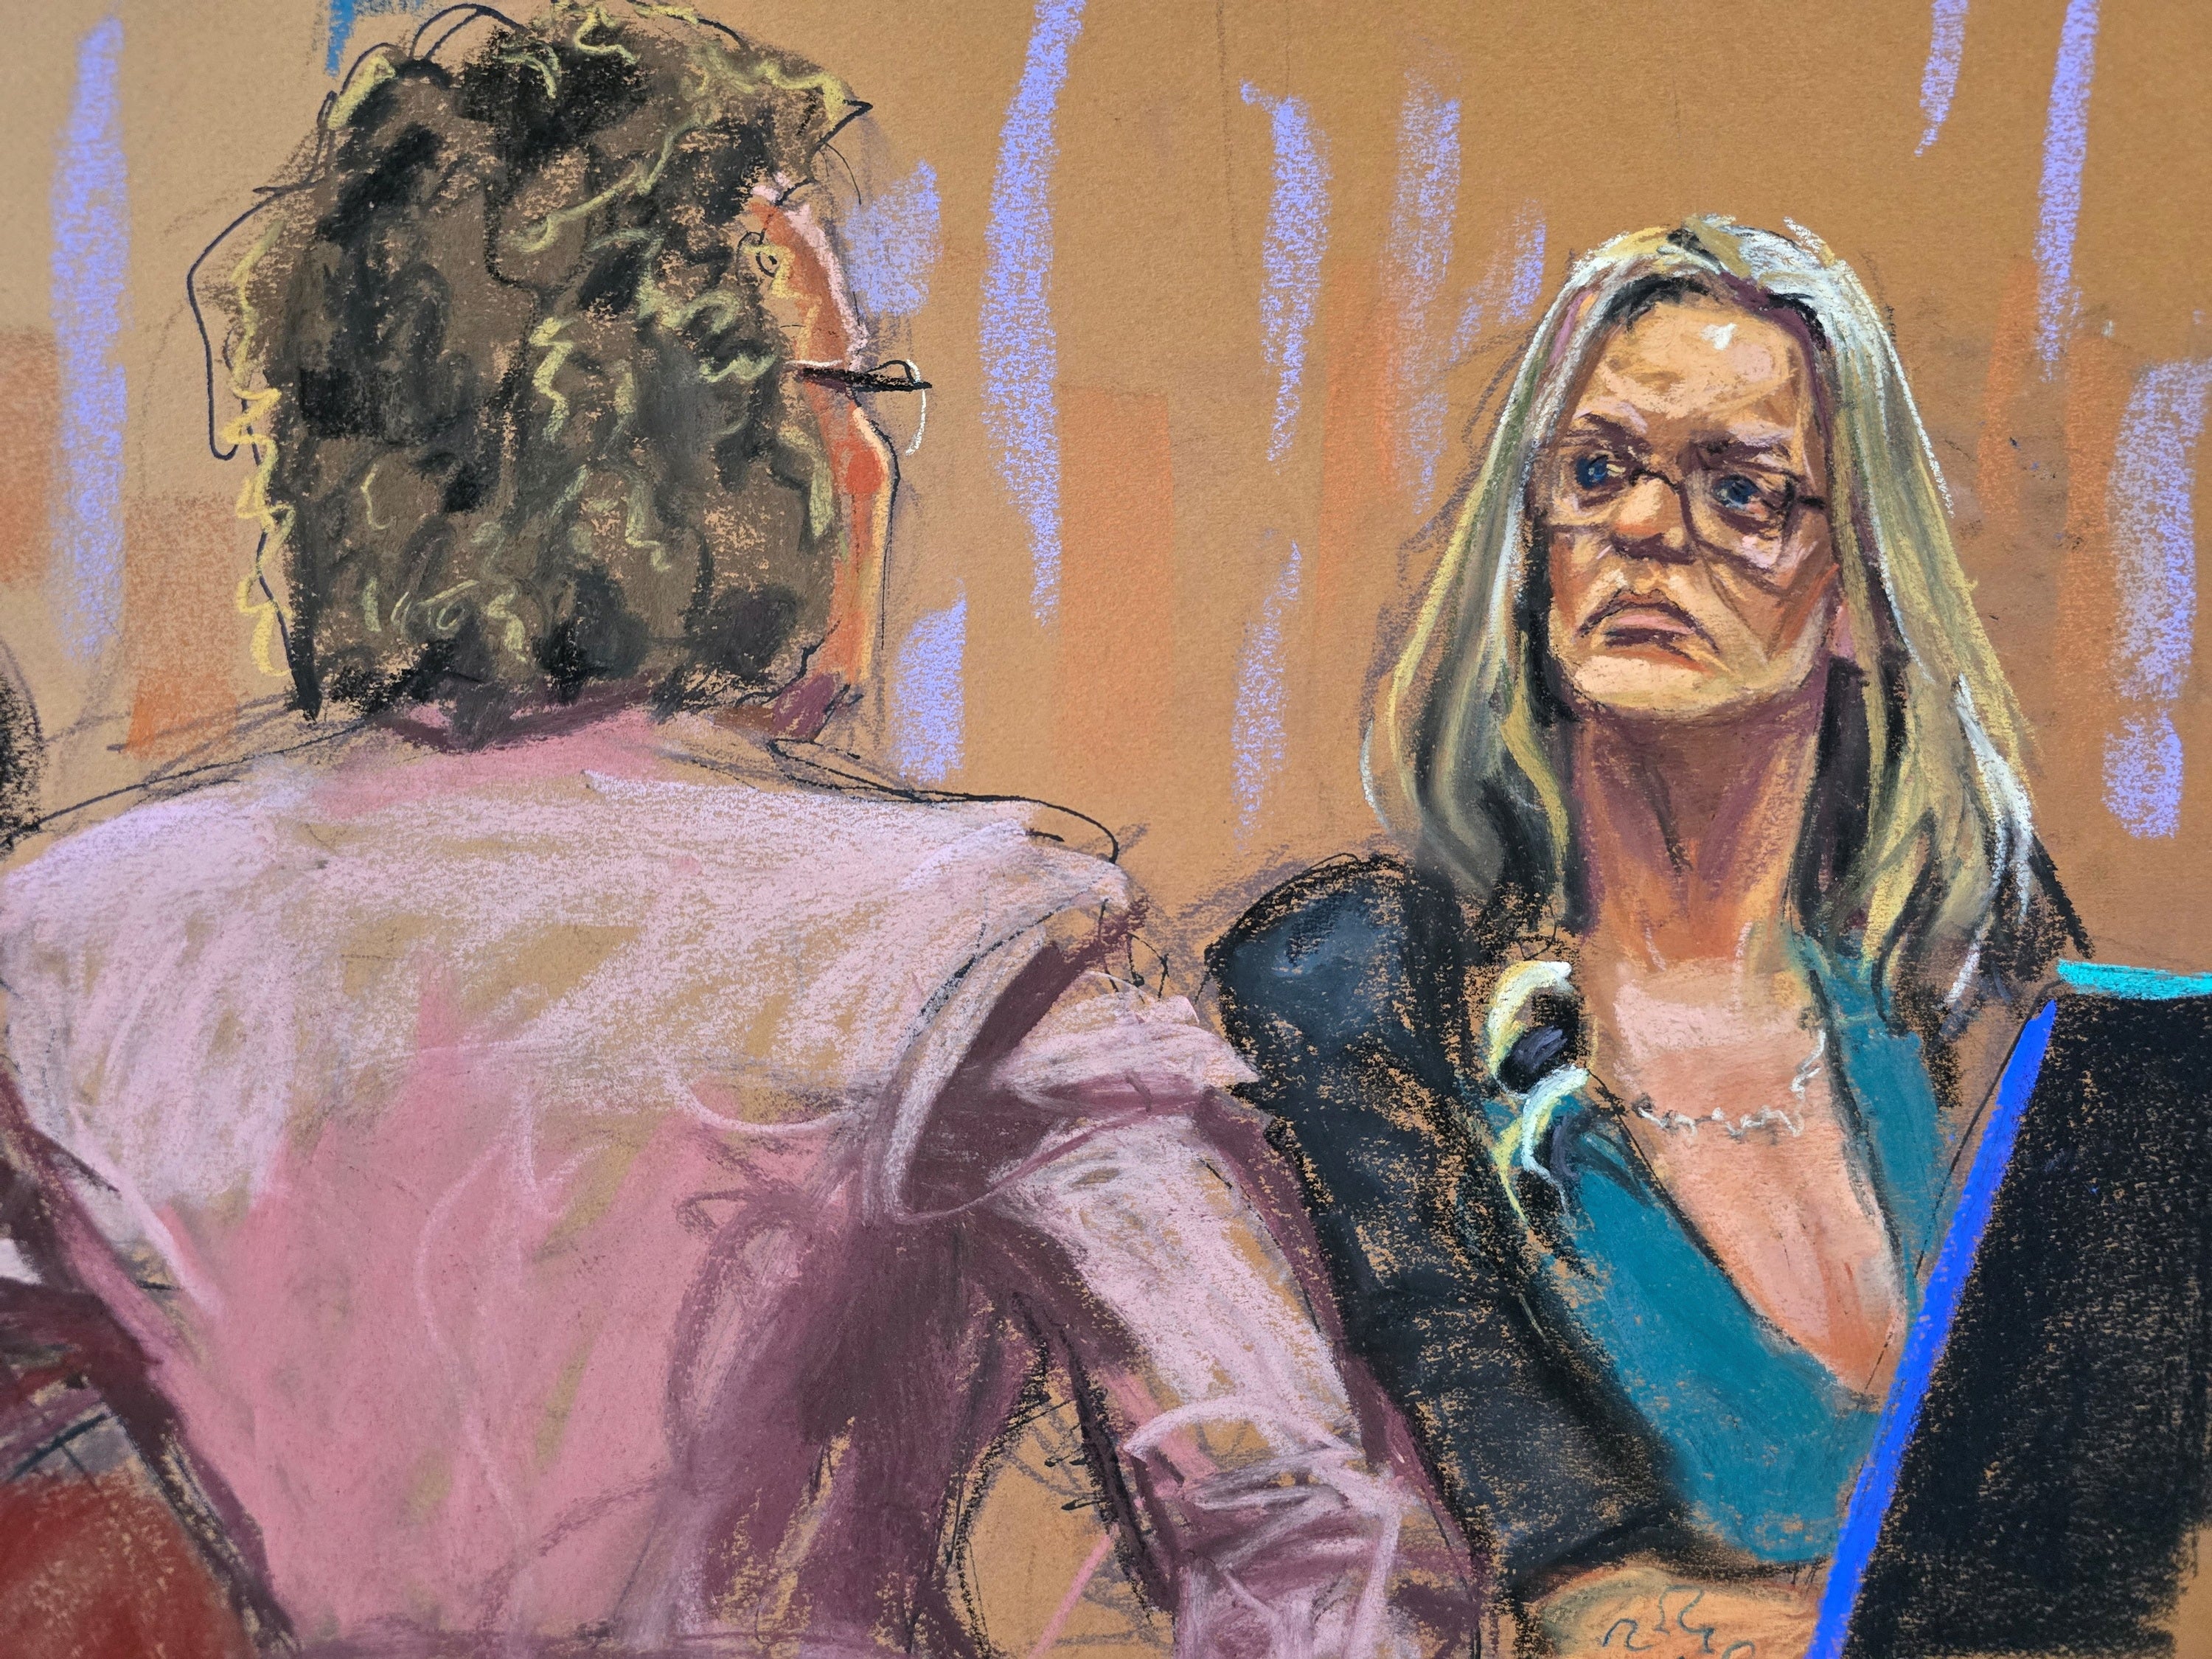 A courtroom sketch depicts Stormy Daniels on the witness stand facing questions from Donald Trump’s attorney Susan Necheles on 9 May.